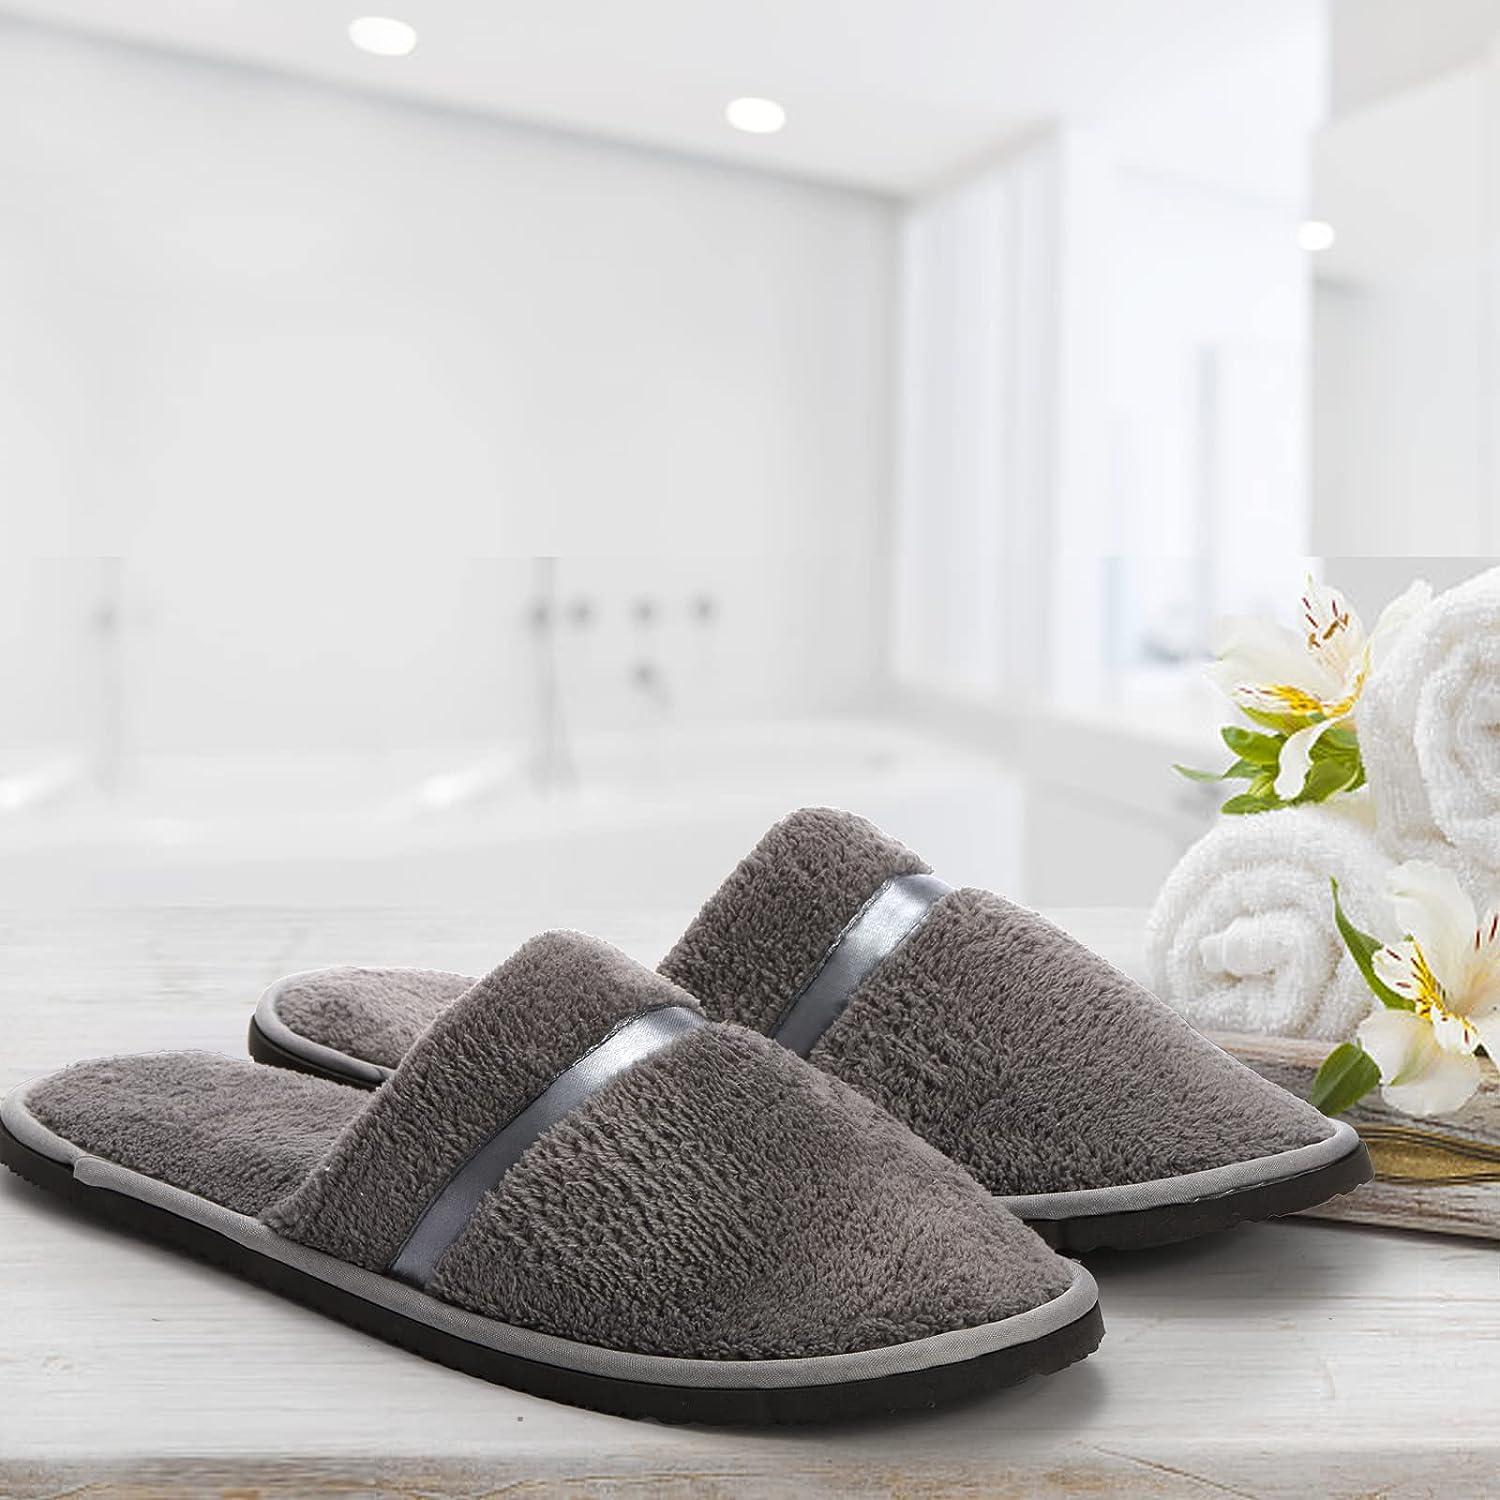 Buy LUXEHOME Spa Slippers in Bulk; 20 Pairs Disposable White Hotel Slippers  for Guests; Open Toe Slippers for Women and Men Online at Lowest Price Ever  in India | Check Reviews &